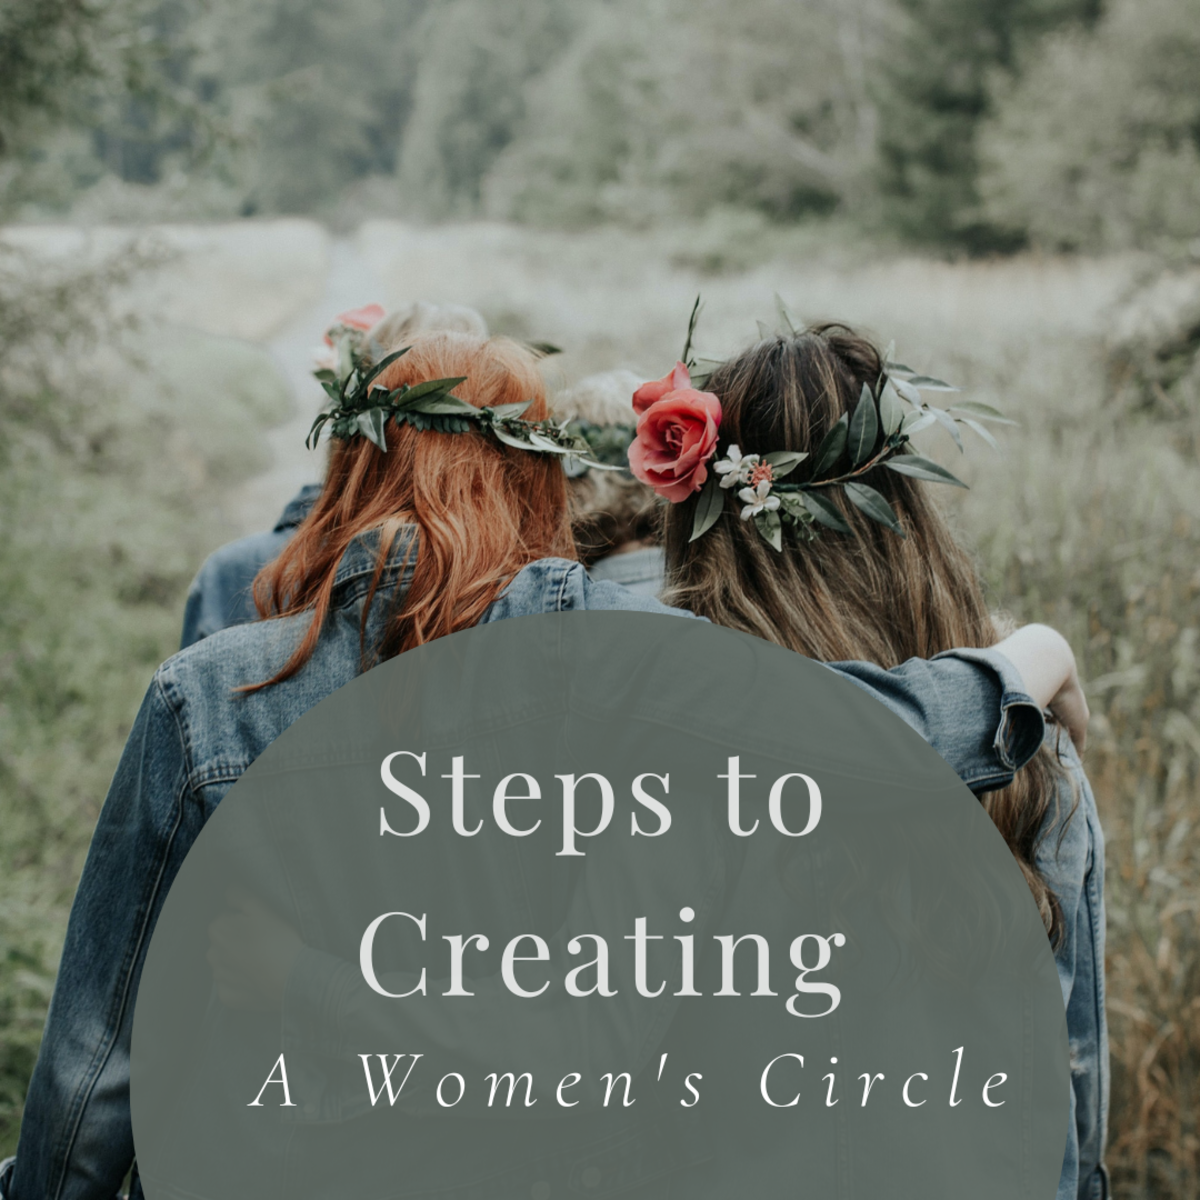 Women's Circles are powerful spaces for women to connect with one another. 